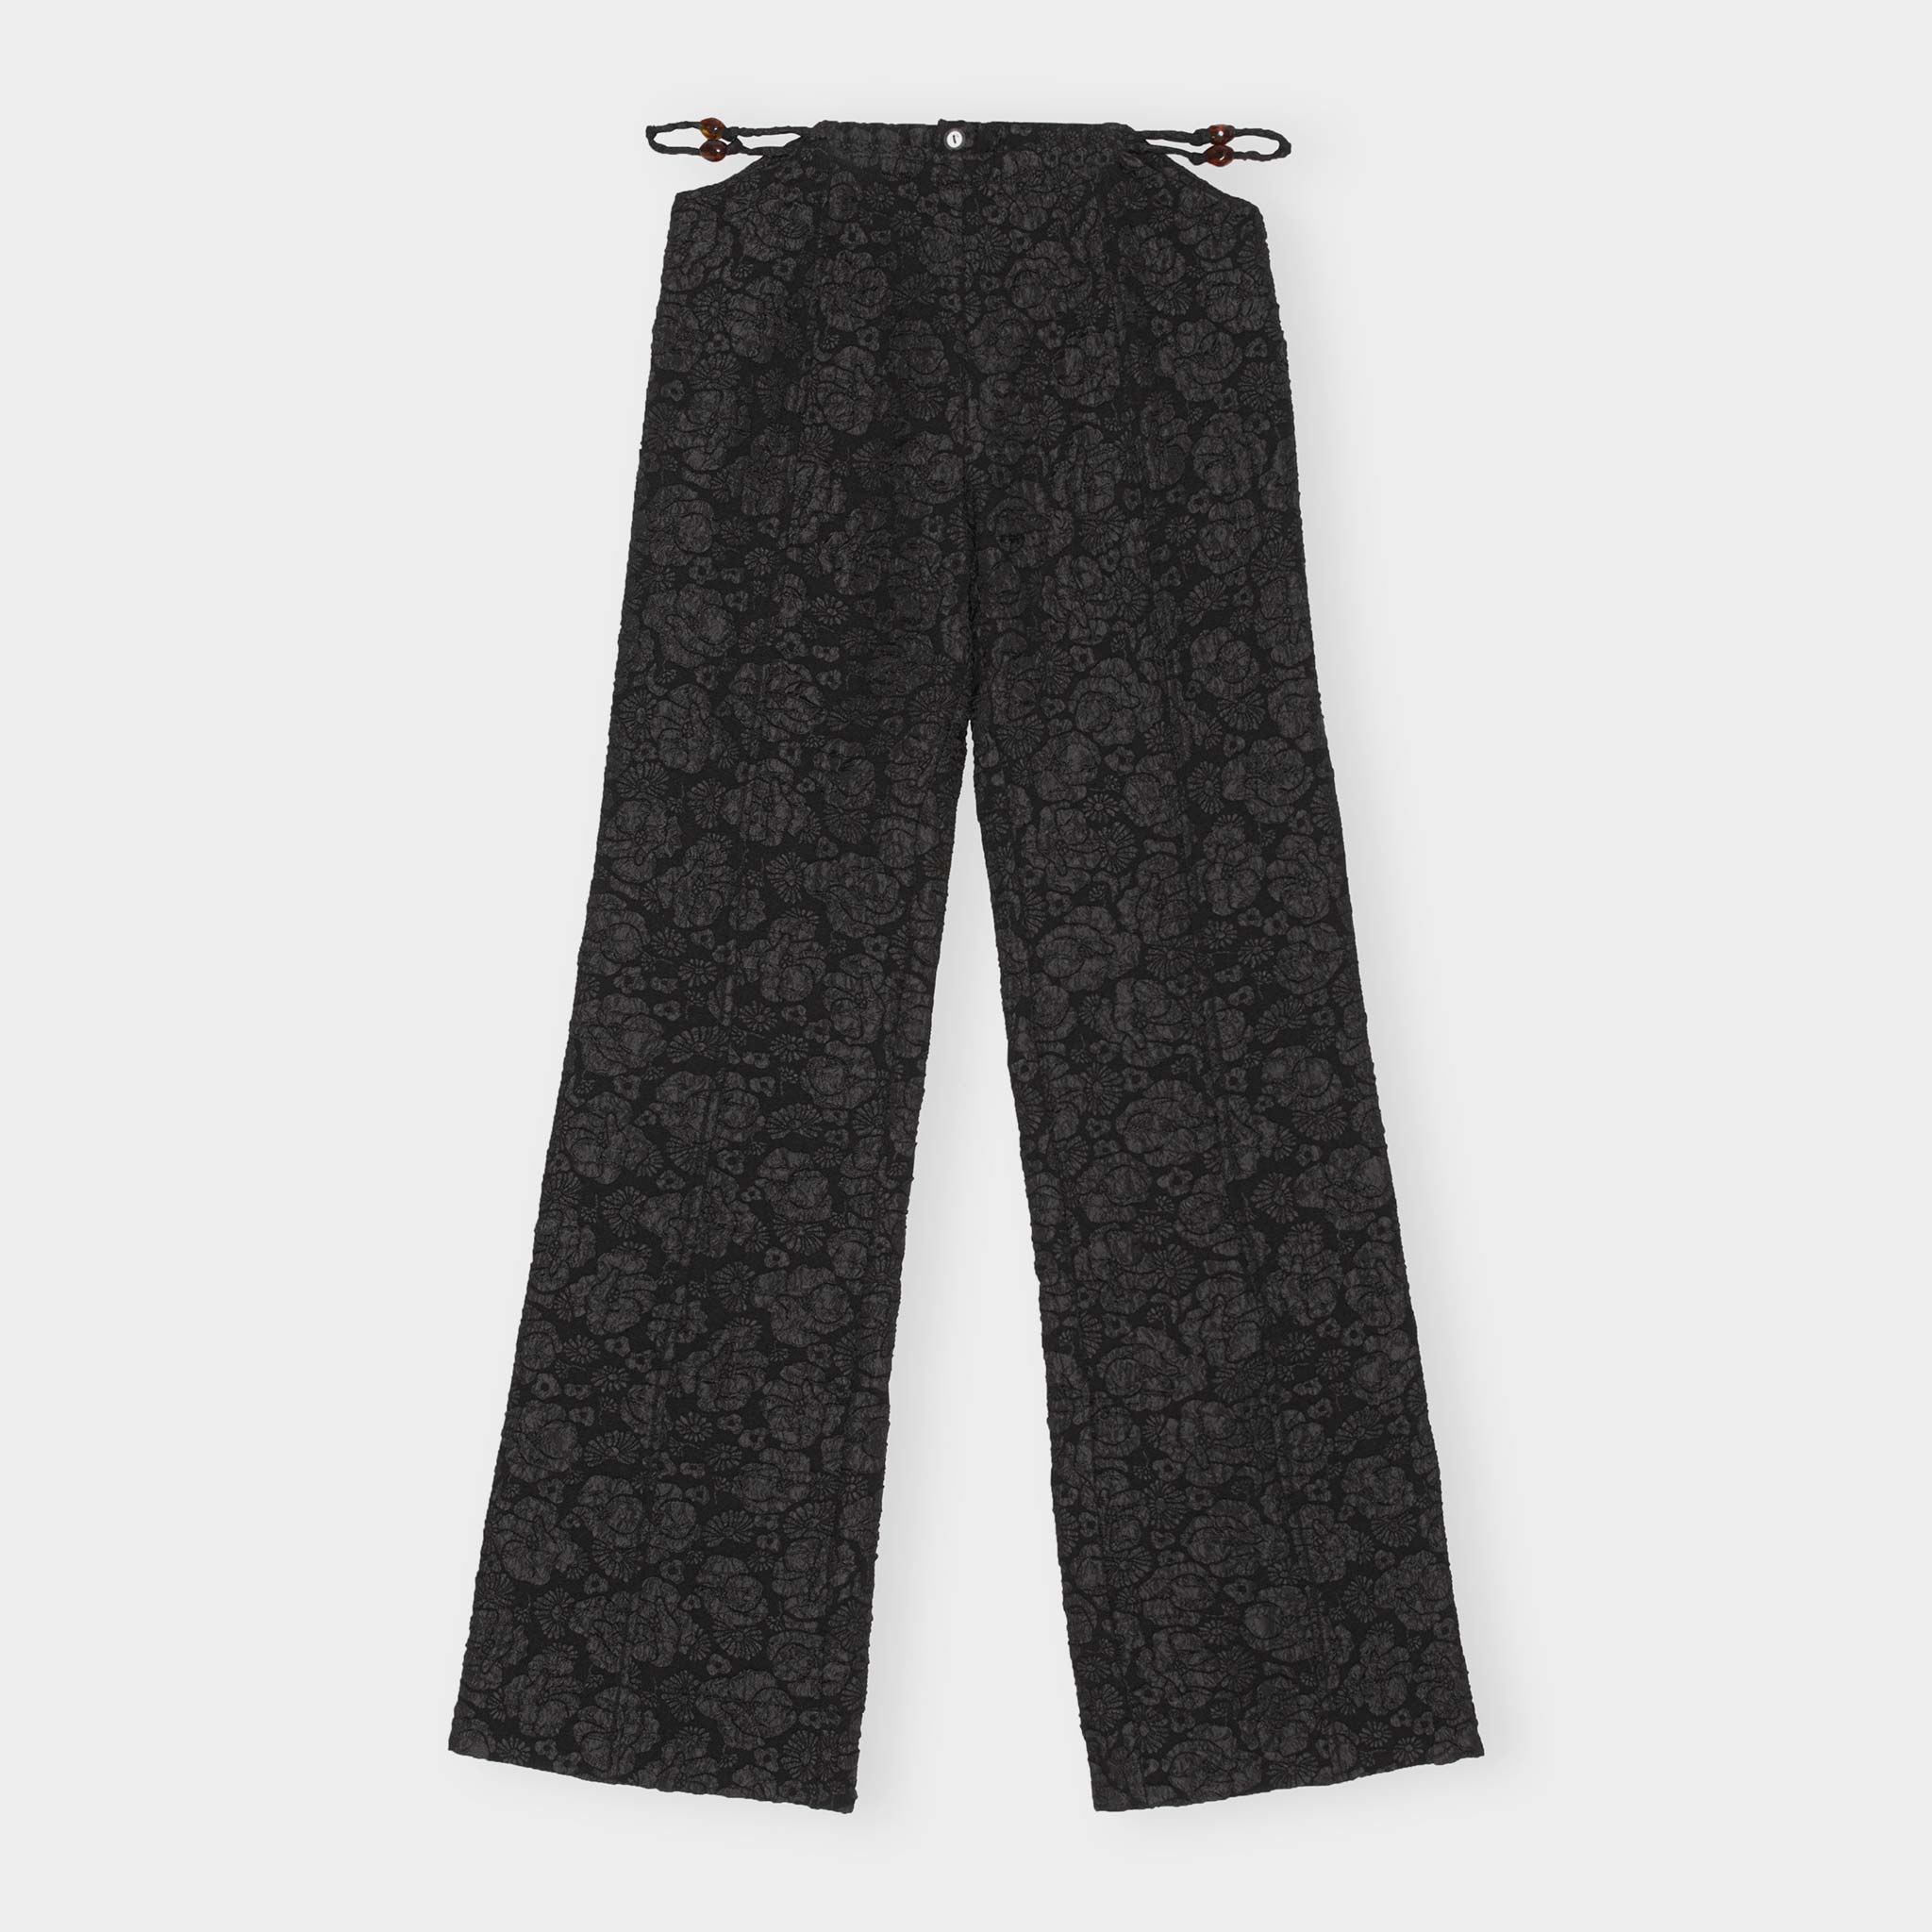 Black floral jacquard trousers with a slightly flared leg and featuring side waist cutout details exposing a thin twisted rope belt - front view.